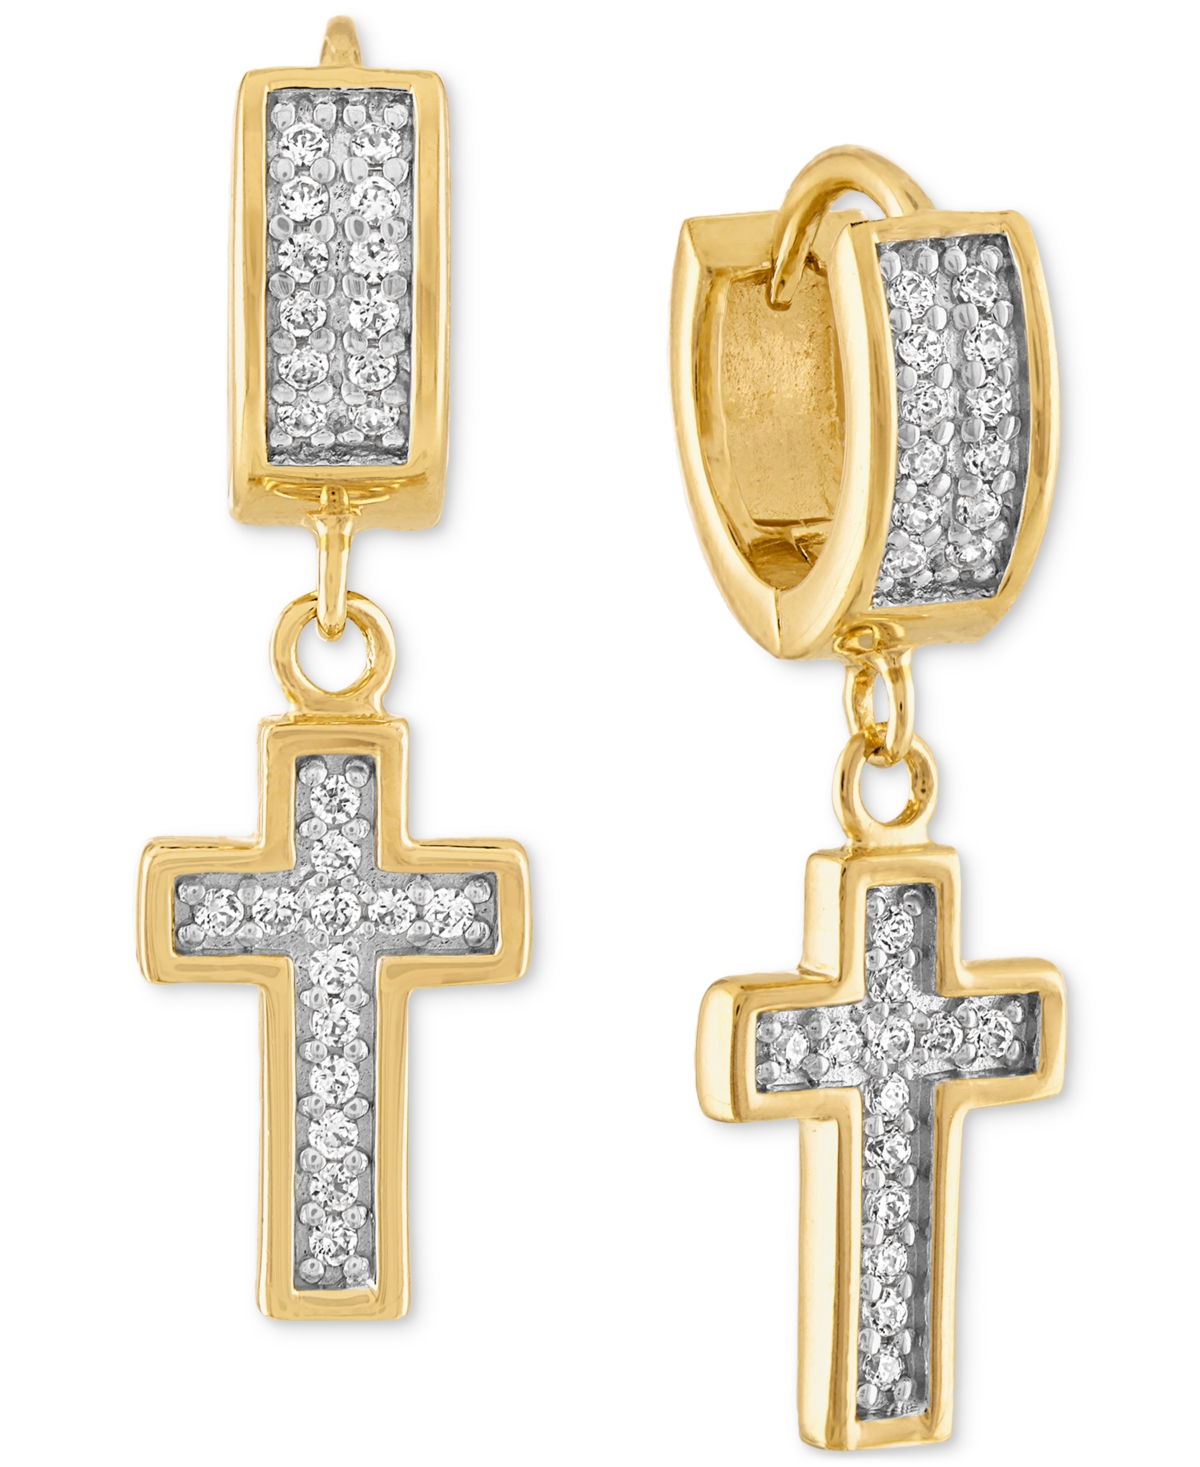 Cubic Zirconia Cross Dangle Huggie Hoop Earrings in 14k Gold-Plated Sterling Silver, Created for Macy's - Gold Over Silver